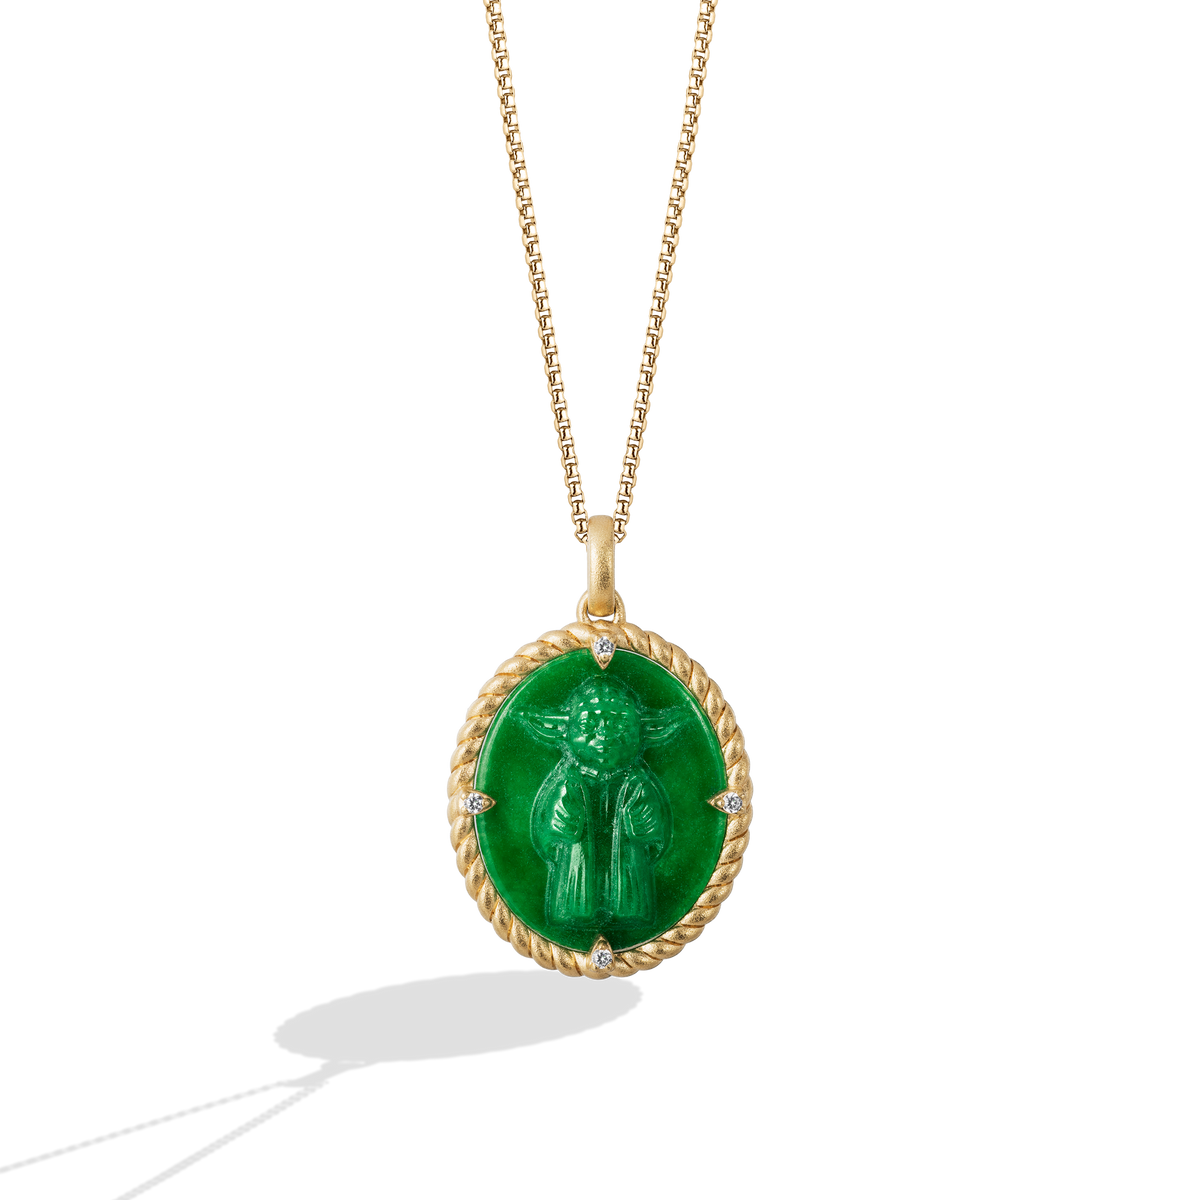 Beautiful Emerald Green Jade Buddha Pendant 18K Gold Plated Necklace Real  Jade Wealth Good Luck Protection Sense-of-wellbeing Gift for Her - Etsy  Australia